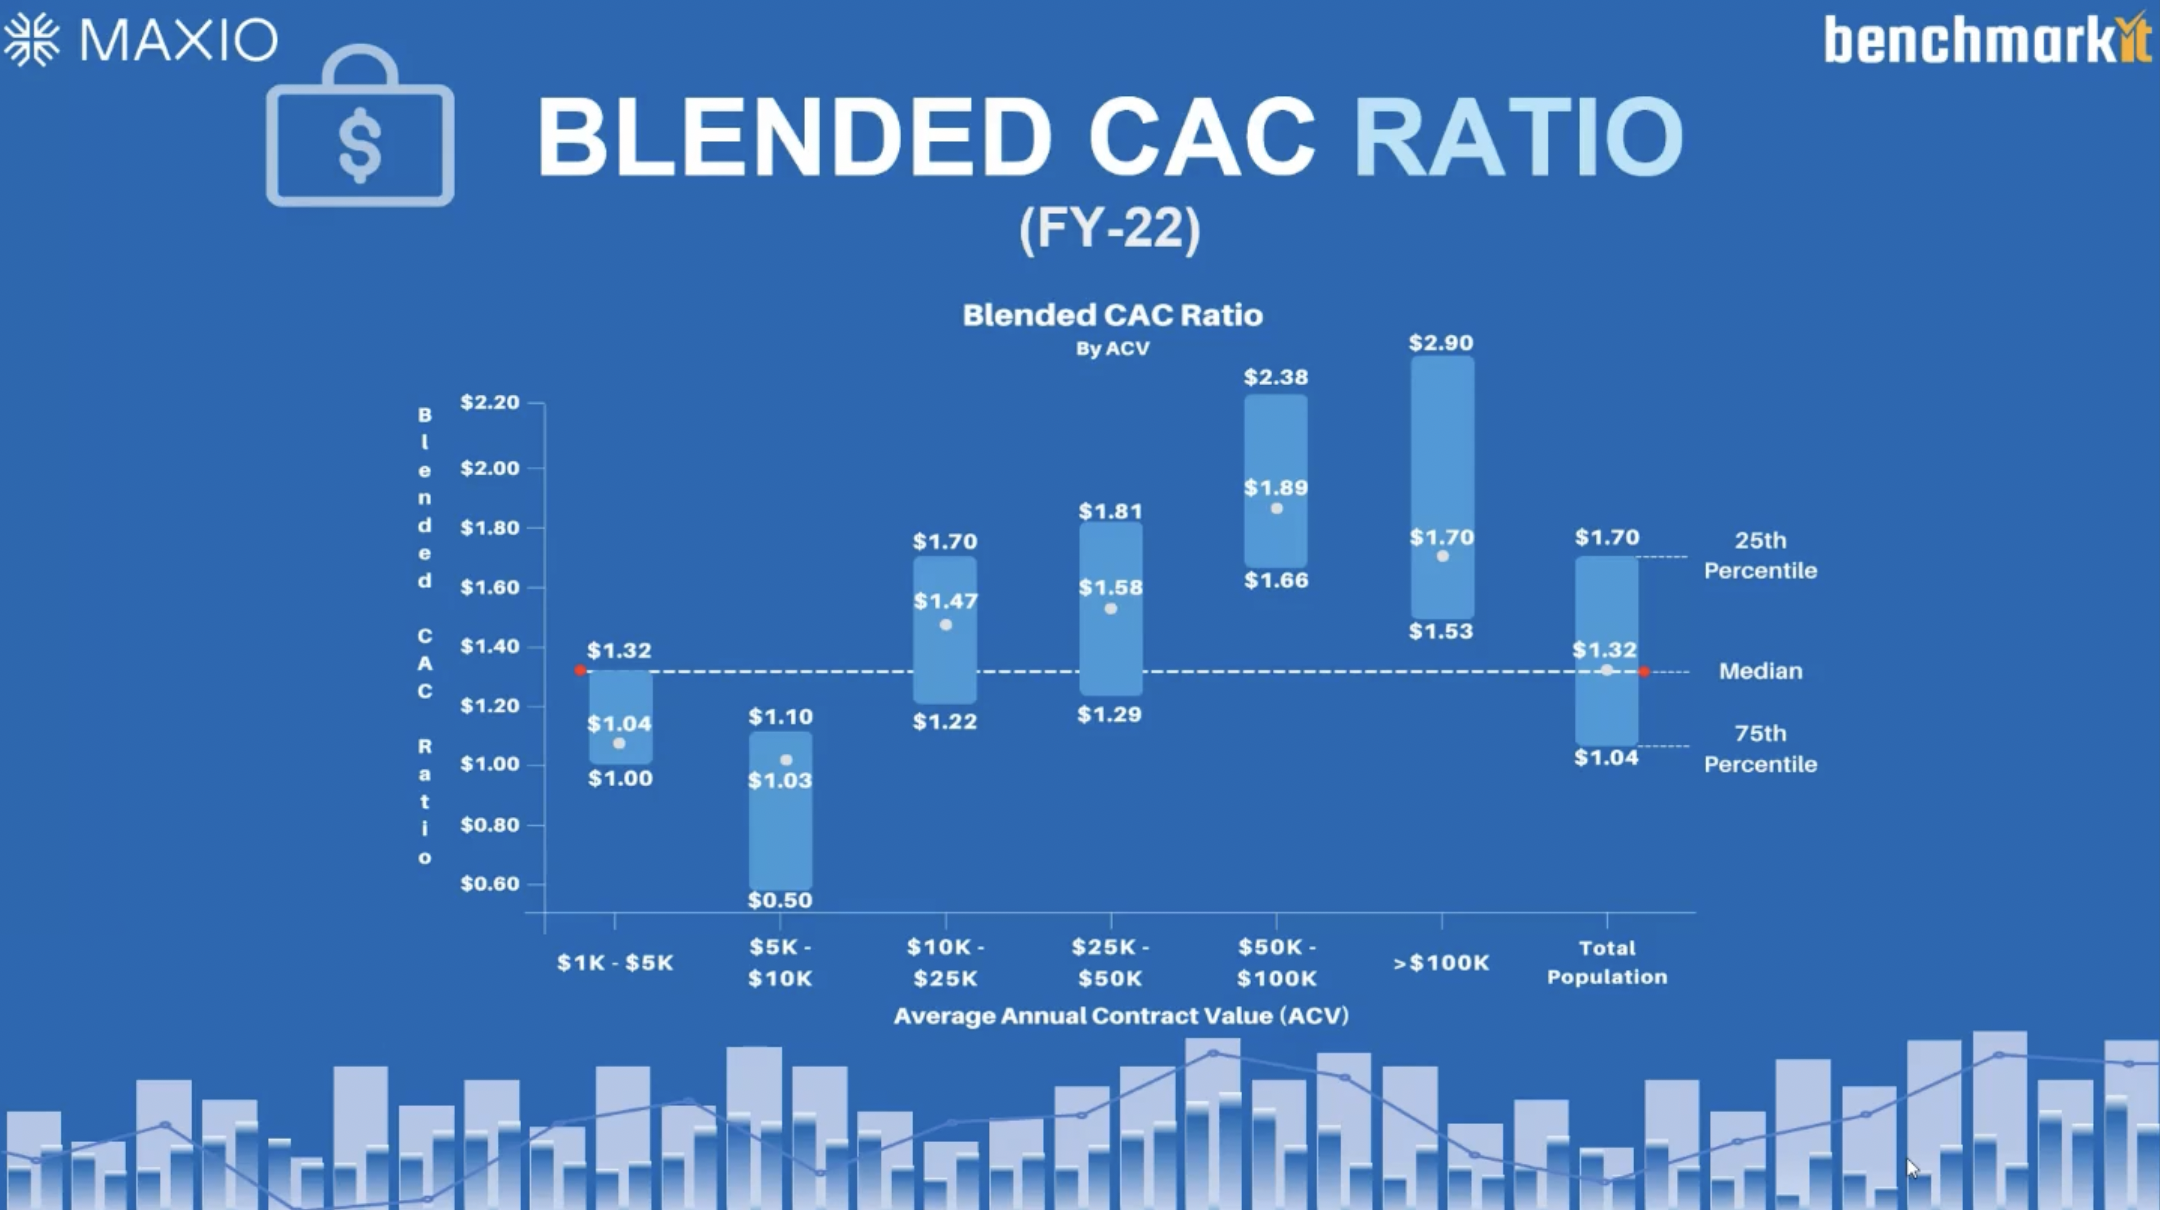 Maxio and Benchmarkit's FY-2022 Blended CAC Ratio chart